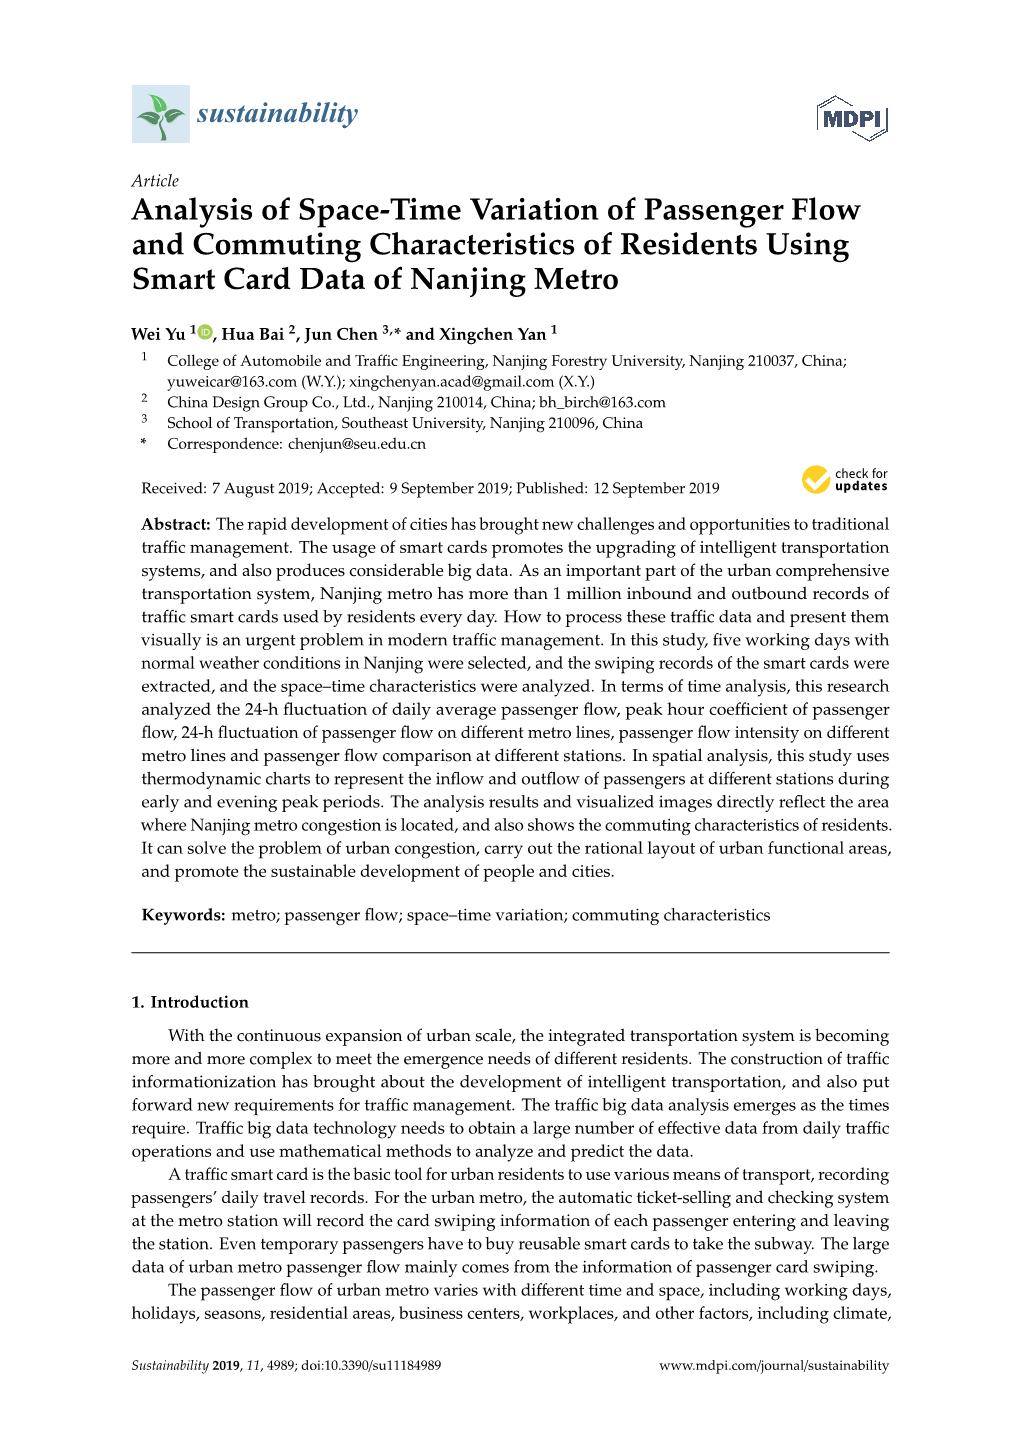 Analysis of Space-Time Variation of Passenger Flow and Commuting Characteristics of Residents Using Smart Card Data of Nanjing Metro